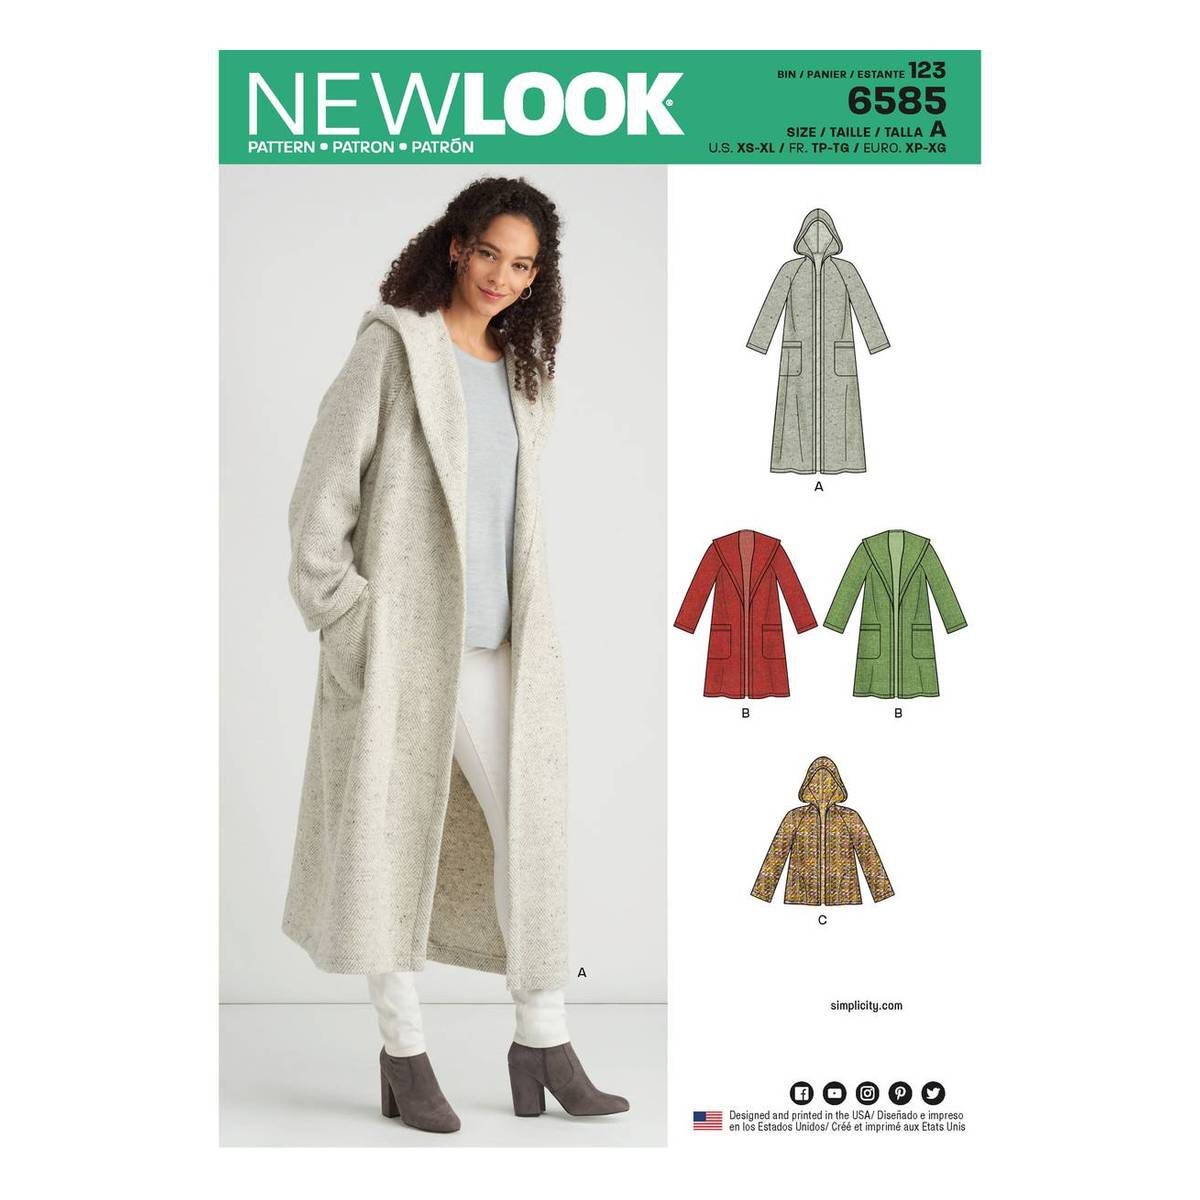 New Look Women's Coat with Hood Sewing Pattern 6585 | Hobbycraft